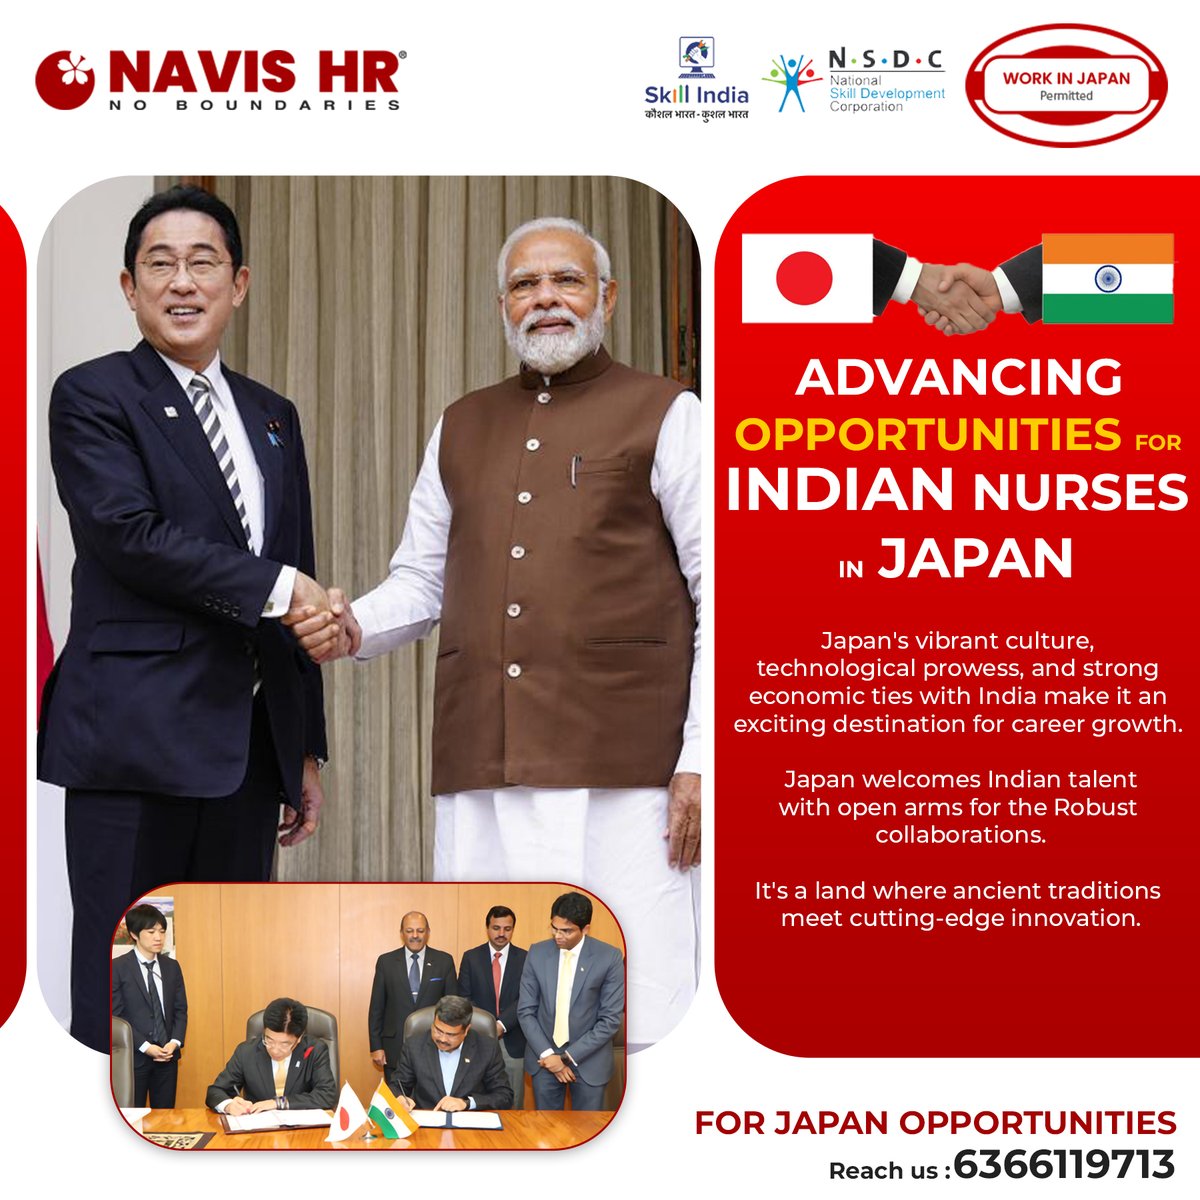 Japan's vibrant culture, technological prowess, and strong economic ties with India make it an exciting destination for career growth. Japan welcomes Indian talent with open arms innovation. #JapanIndiaPartnership #NursingCareers #GlobalOpportunities
navishr.com